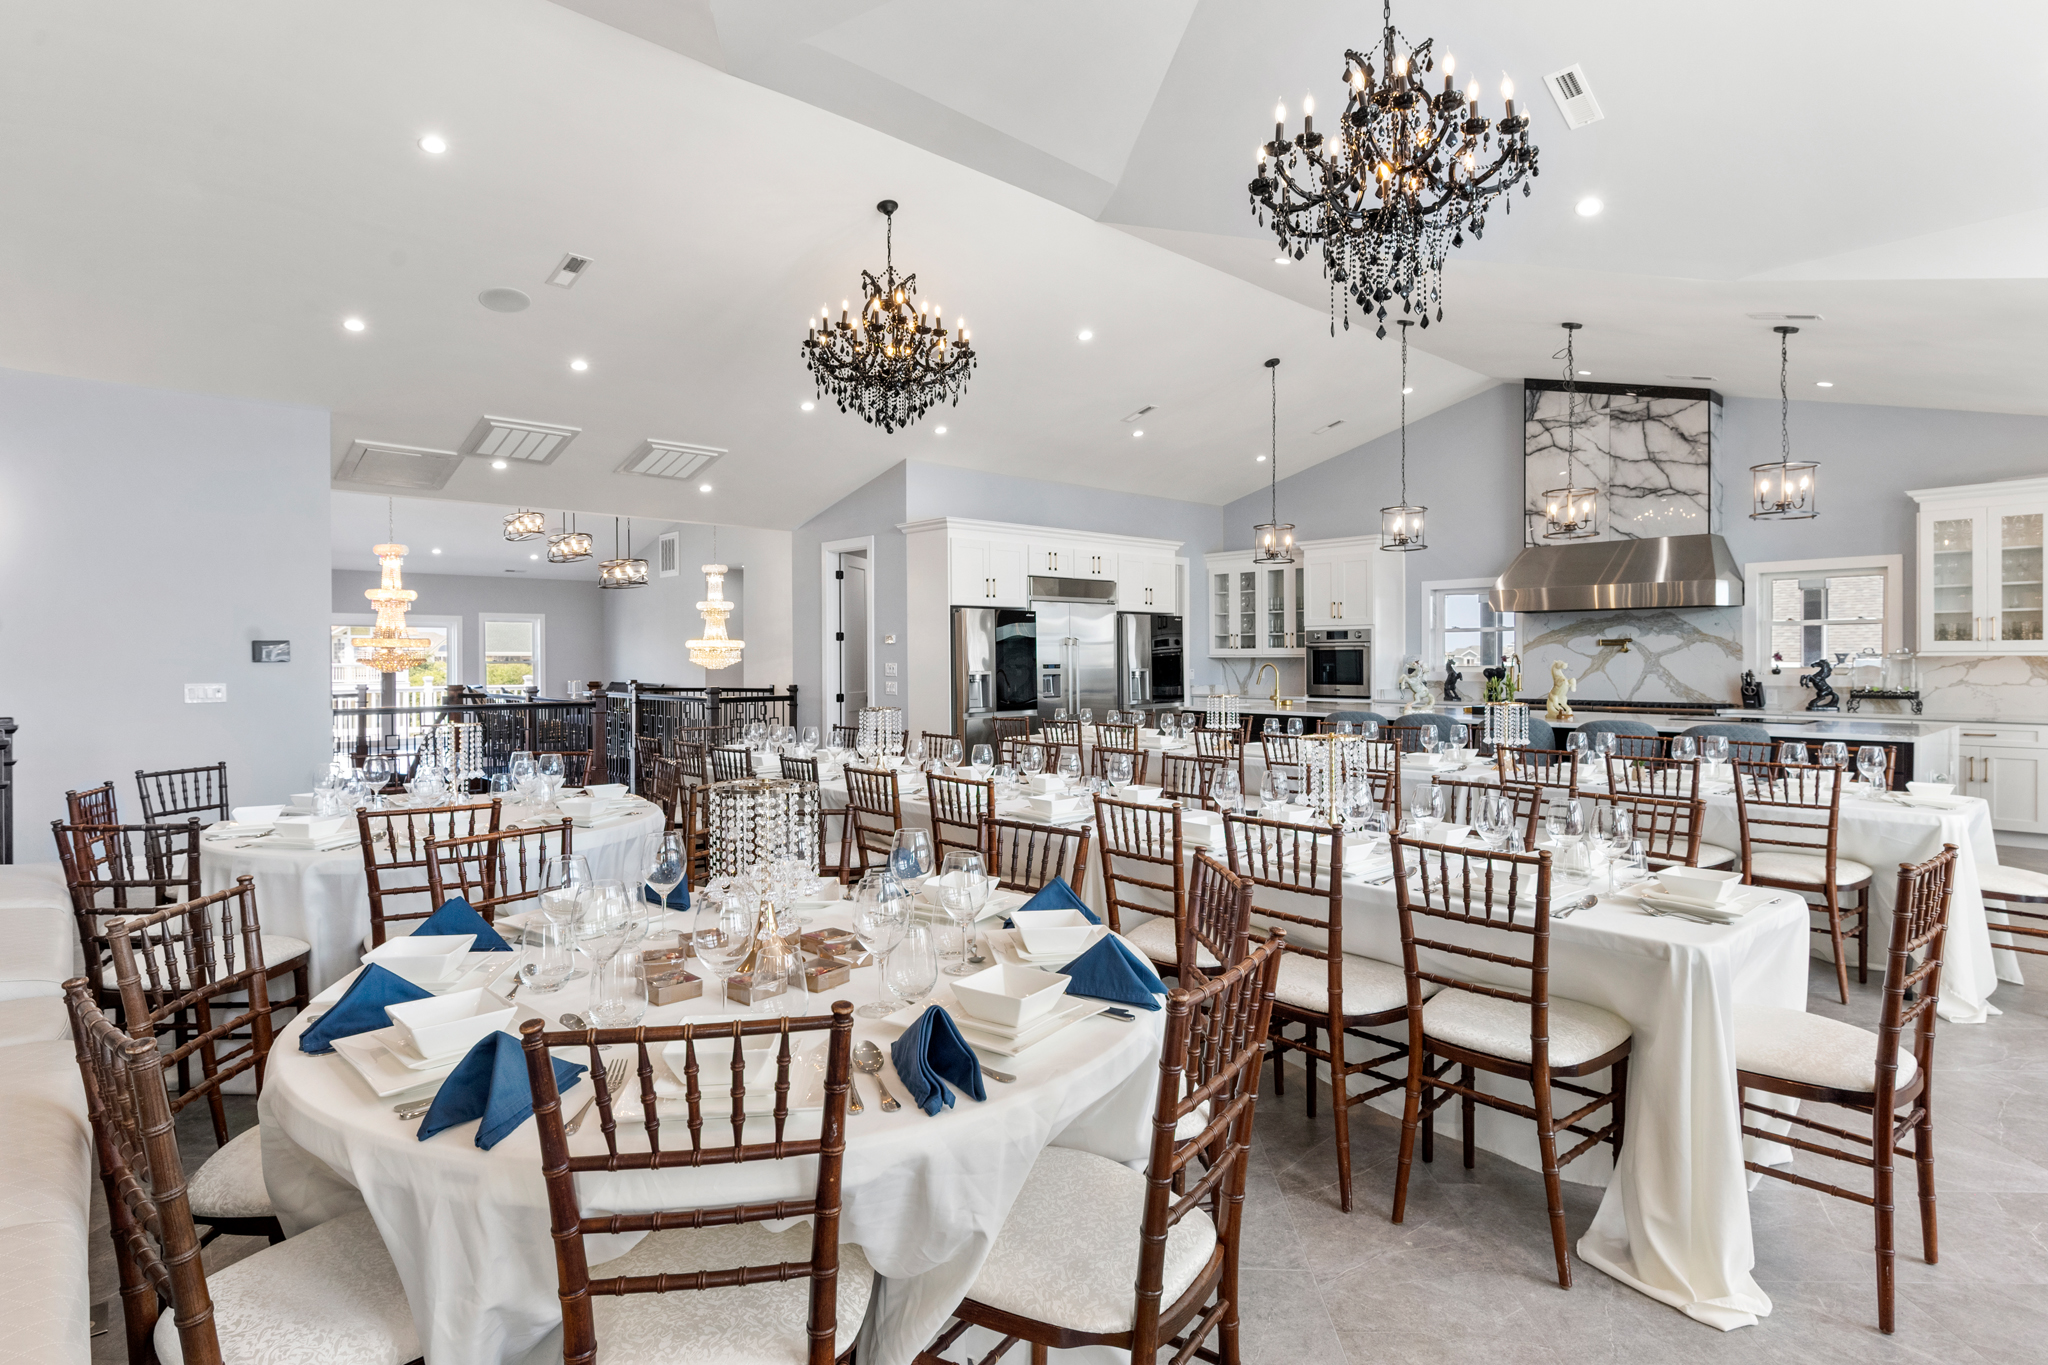 WH786: The OBX One | Top Level Entertainment/Reception Space